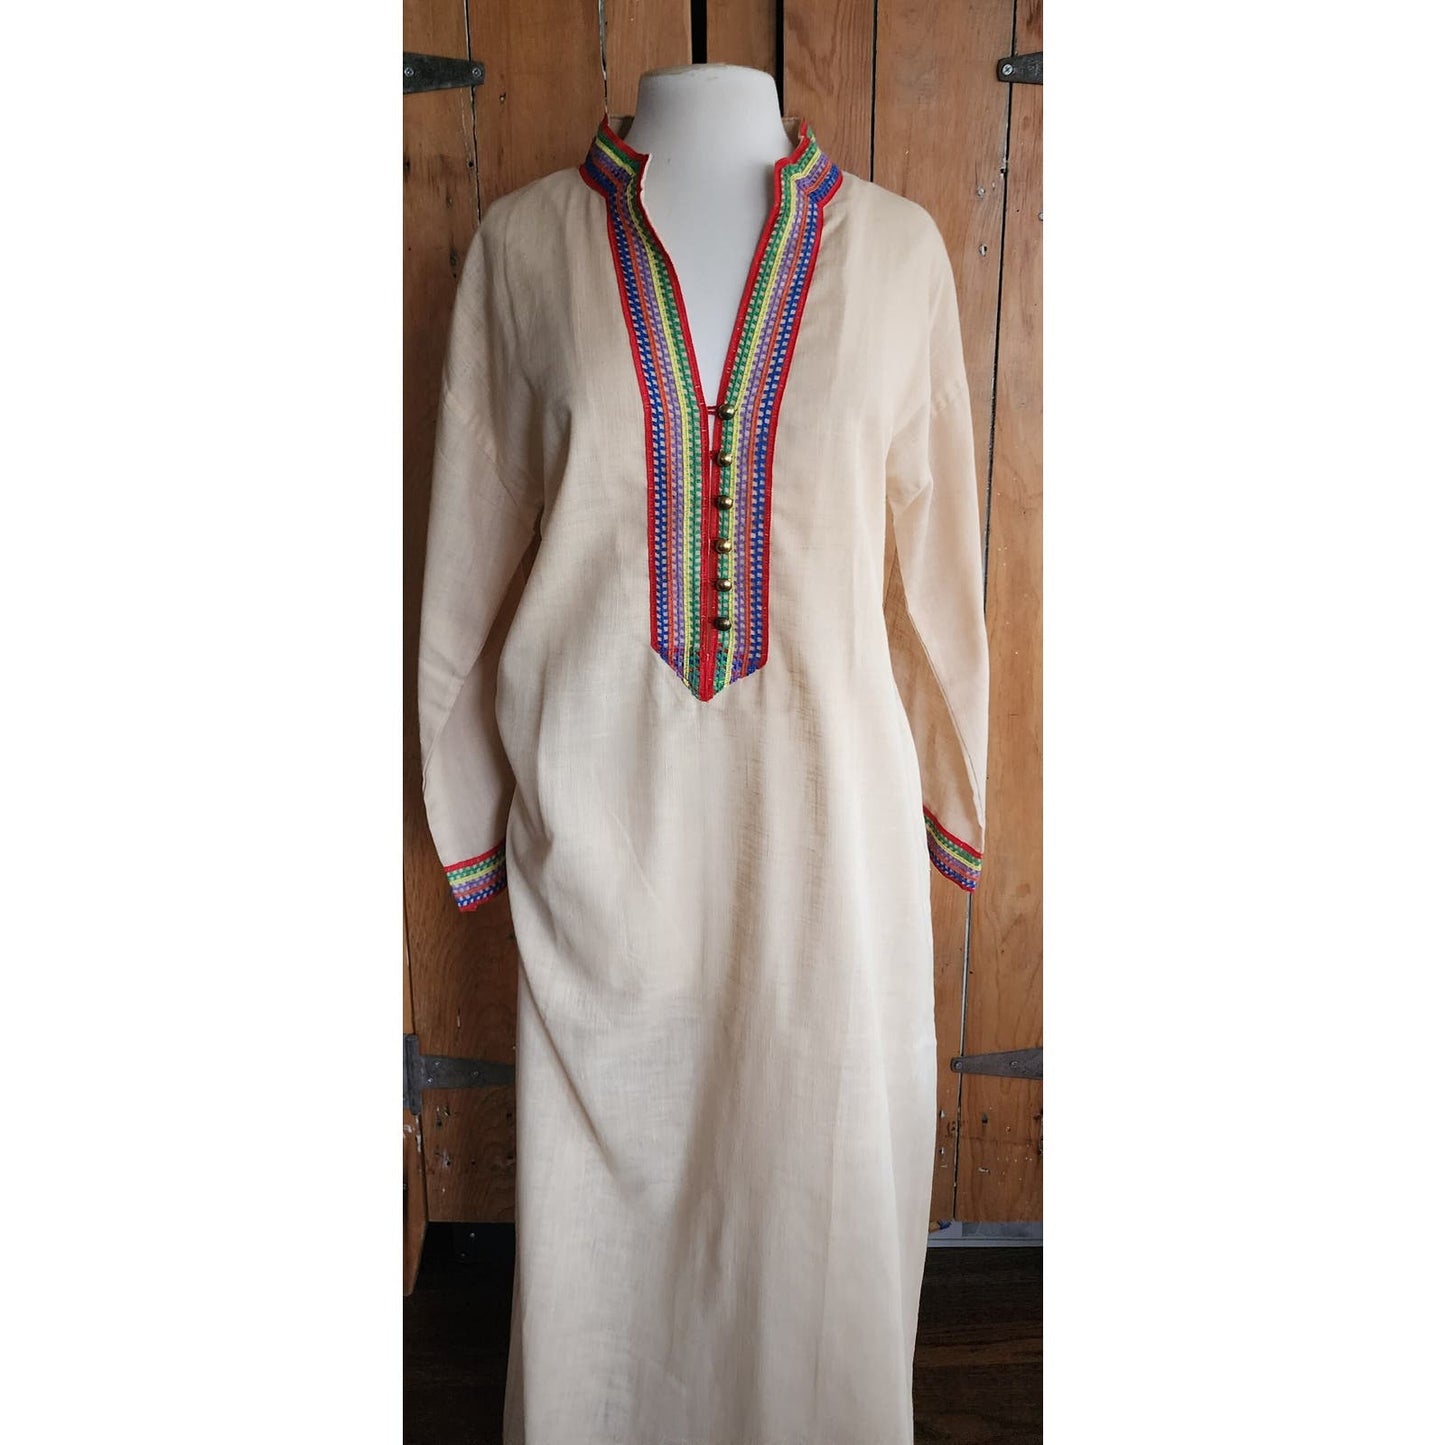 Vintage 70s Beige Maxi Caftan Dress Maxi Embroidered Lounger Sears